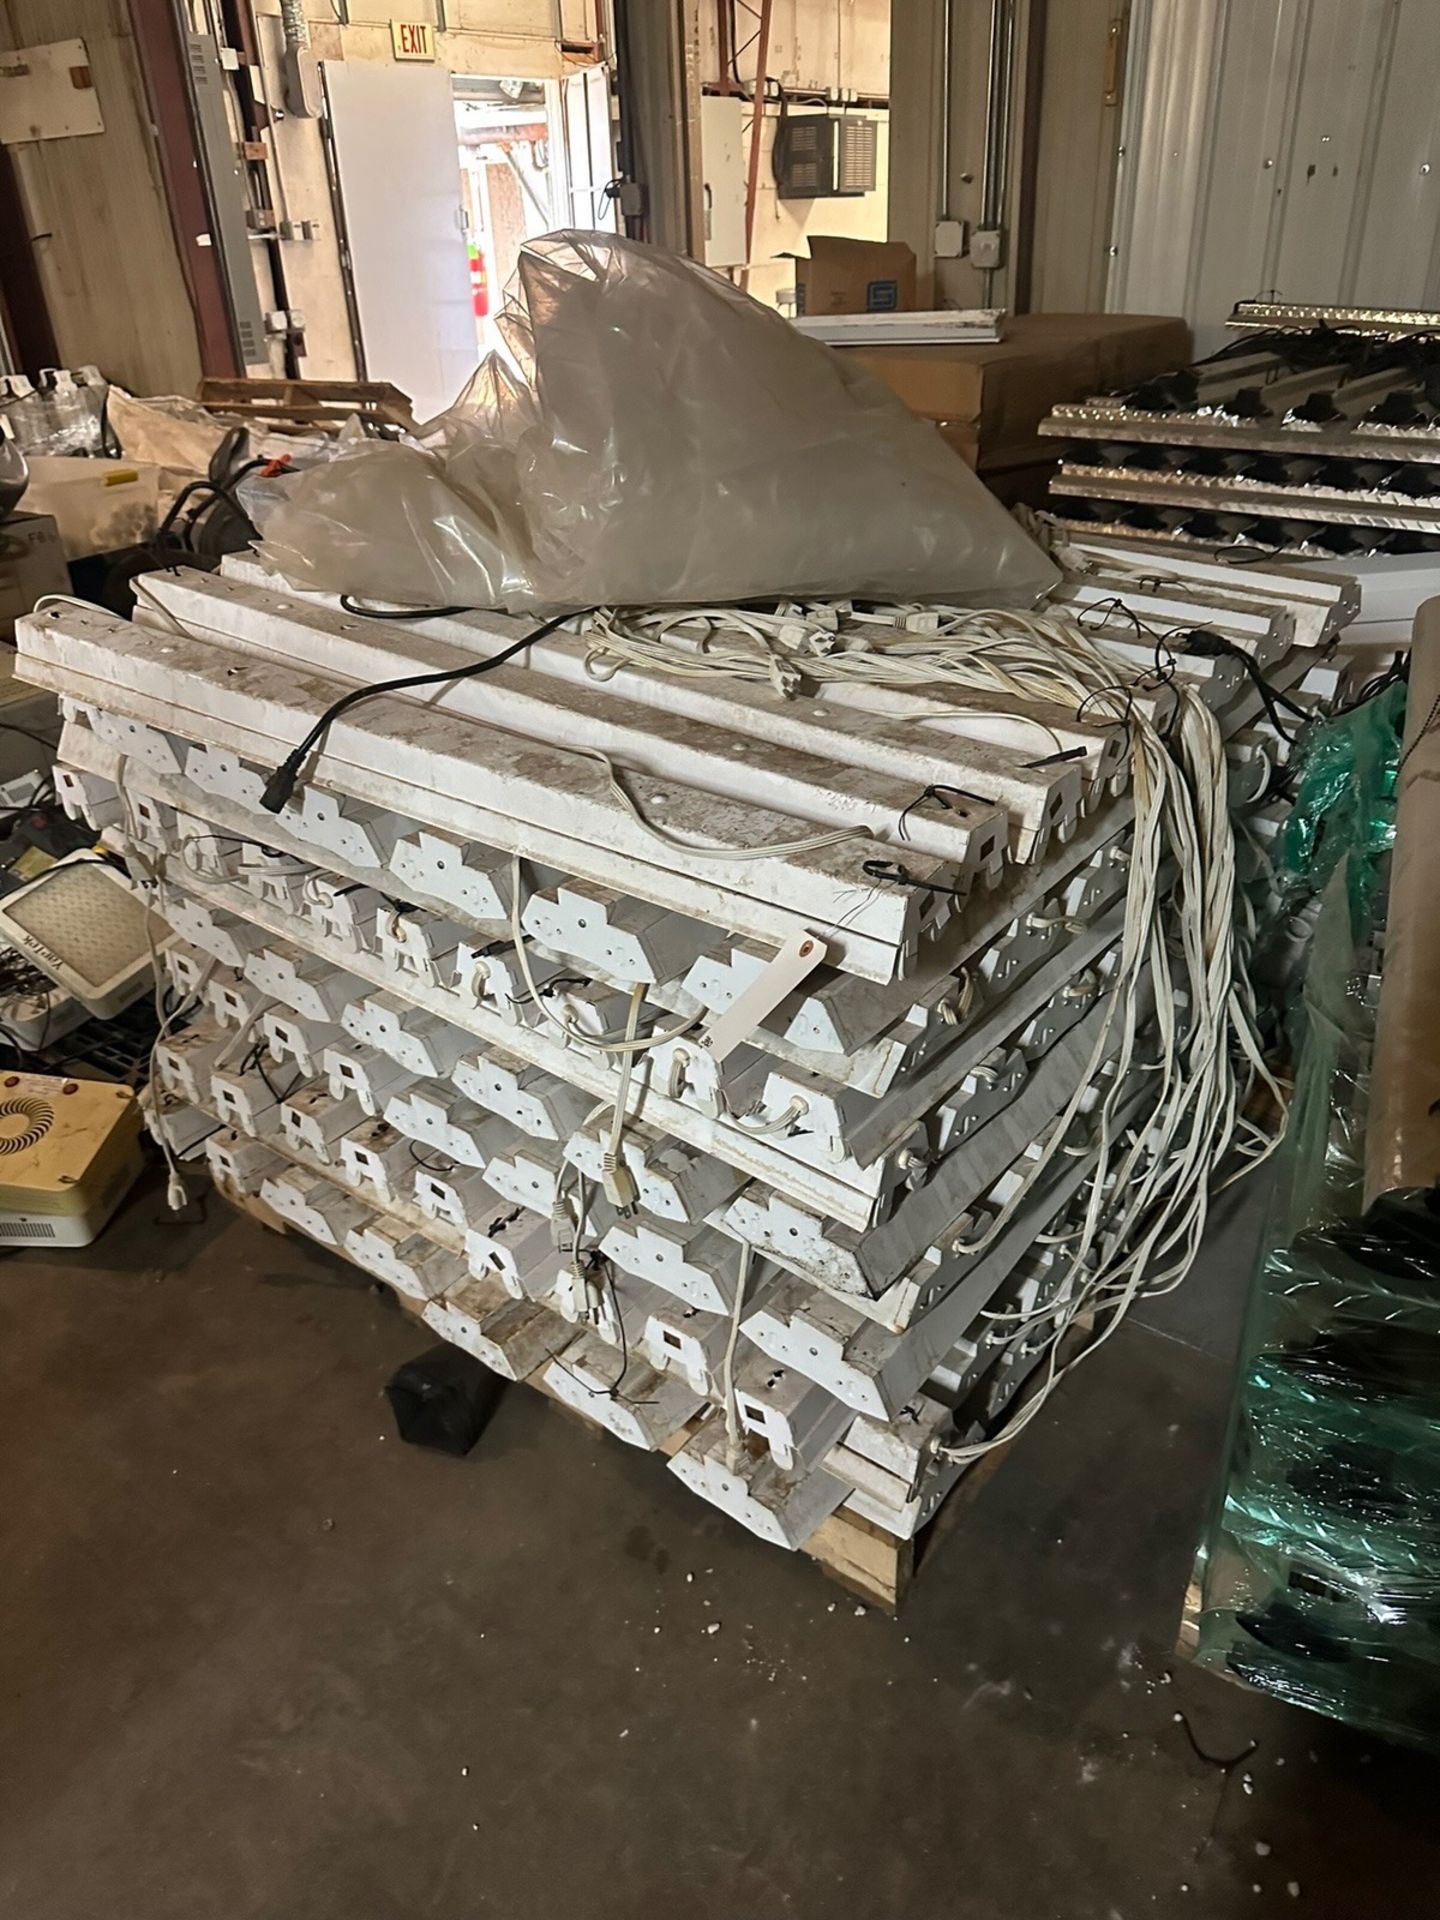 Lithonia Model 1233 Fluorescent Shop Lights, 1 full Pallet, 2 Partial Pallets | Rig Fee $50 - Image 3 of 3